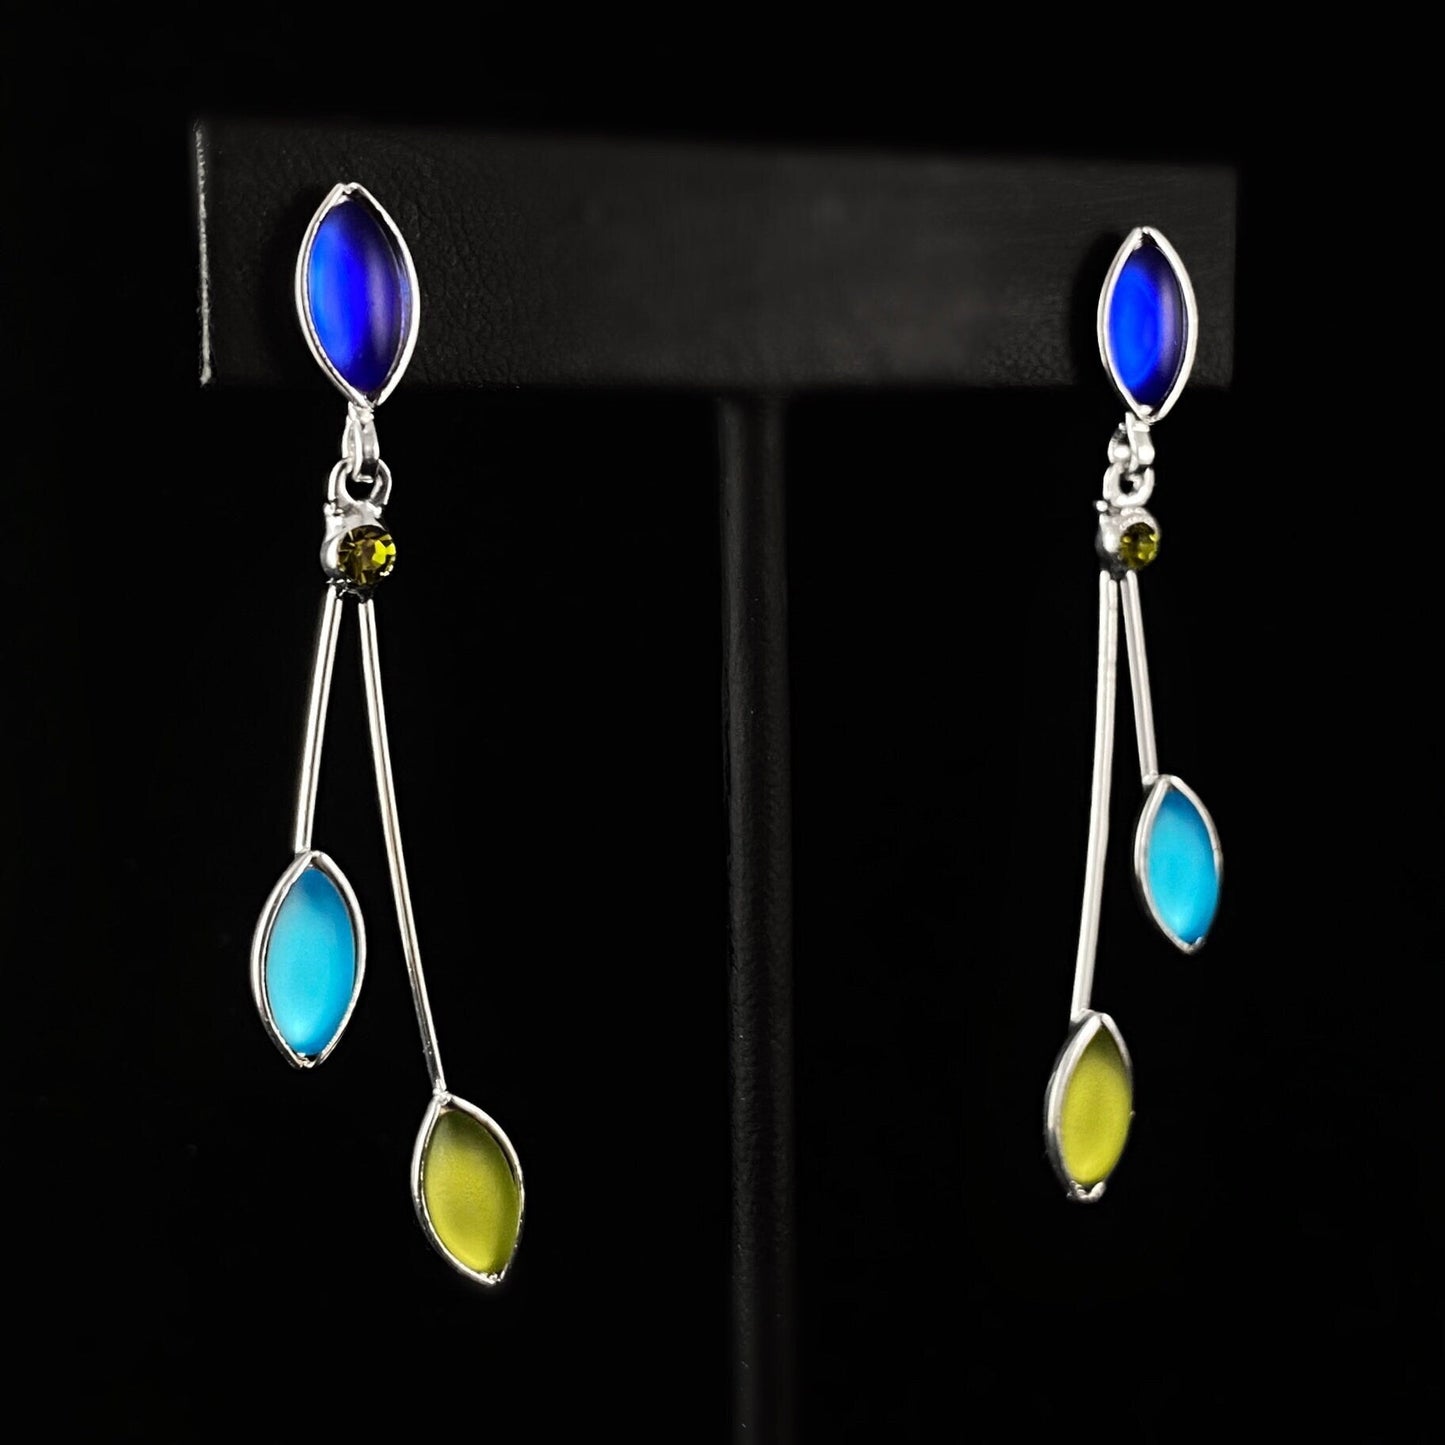 Floral Style Earrings with Silver Wire and Handmade Glass Beads, Hypoallergenic, Aqua/Sapphire/Olive Green - Kristina